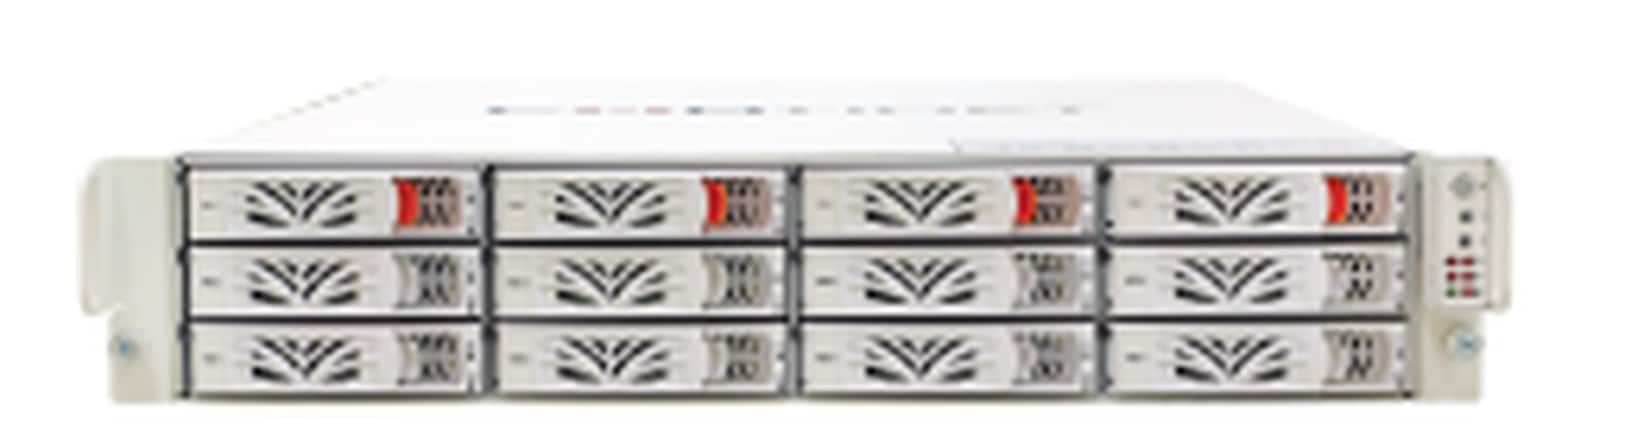 Fortinet FortiSIEM 2200G - security appliance